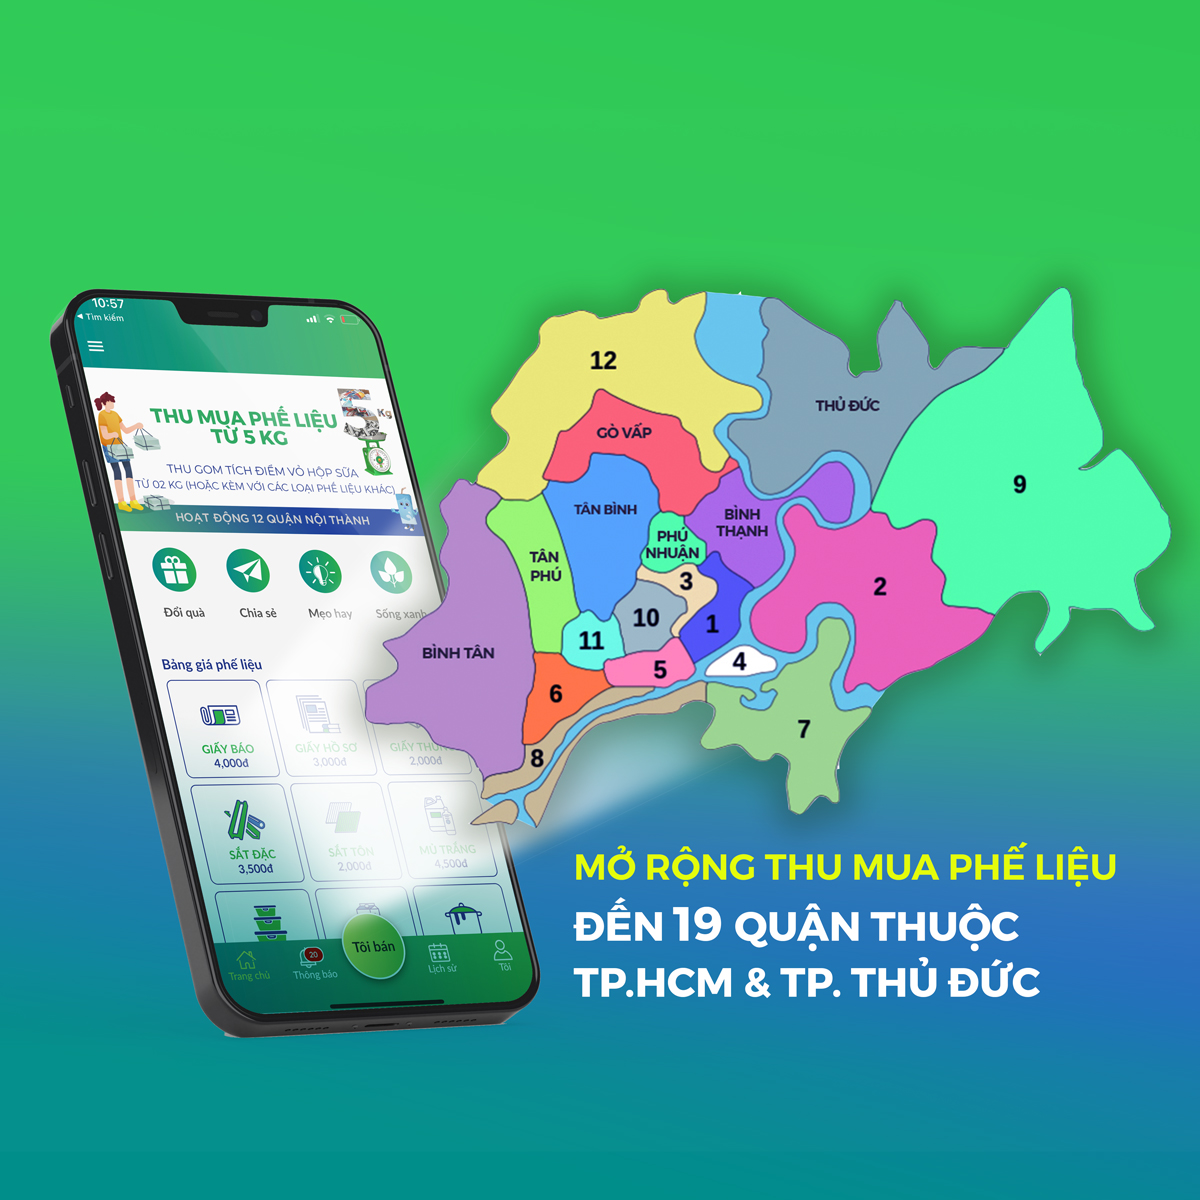 Expanding Veca App’s purchasing in 19 districts in Ho Chi Minh City and Thu Duc City